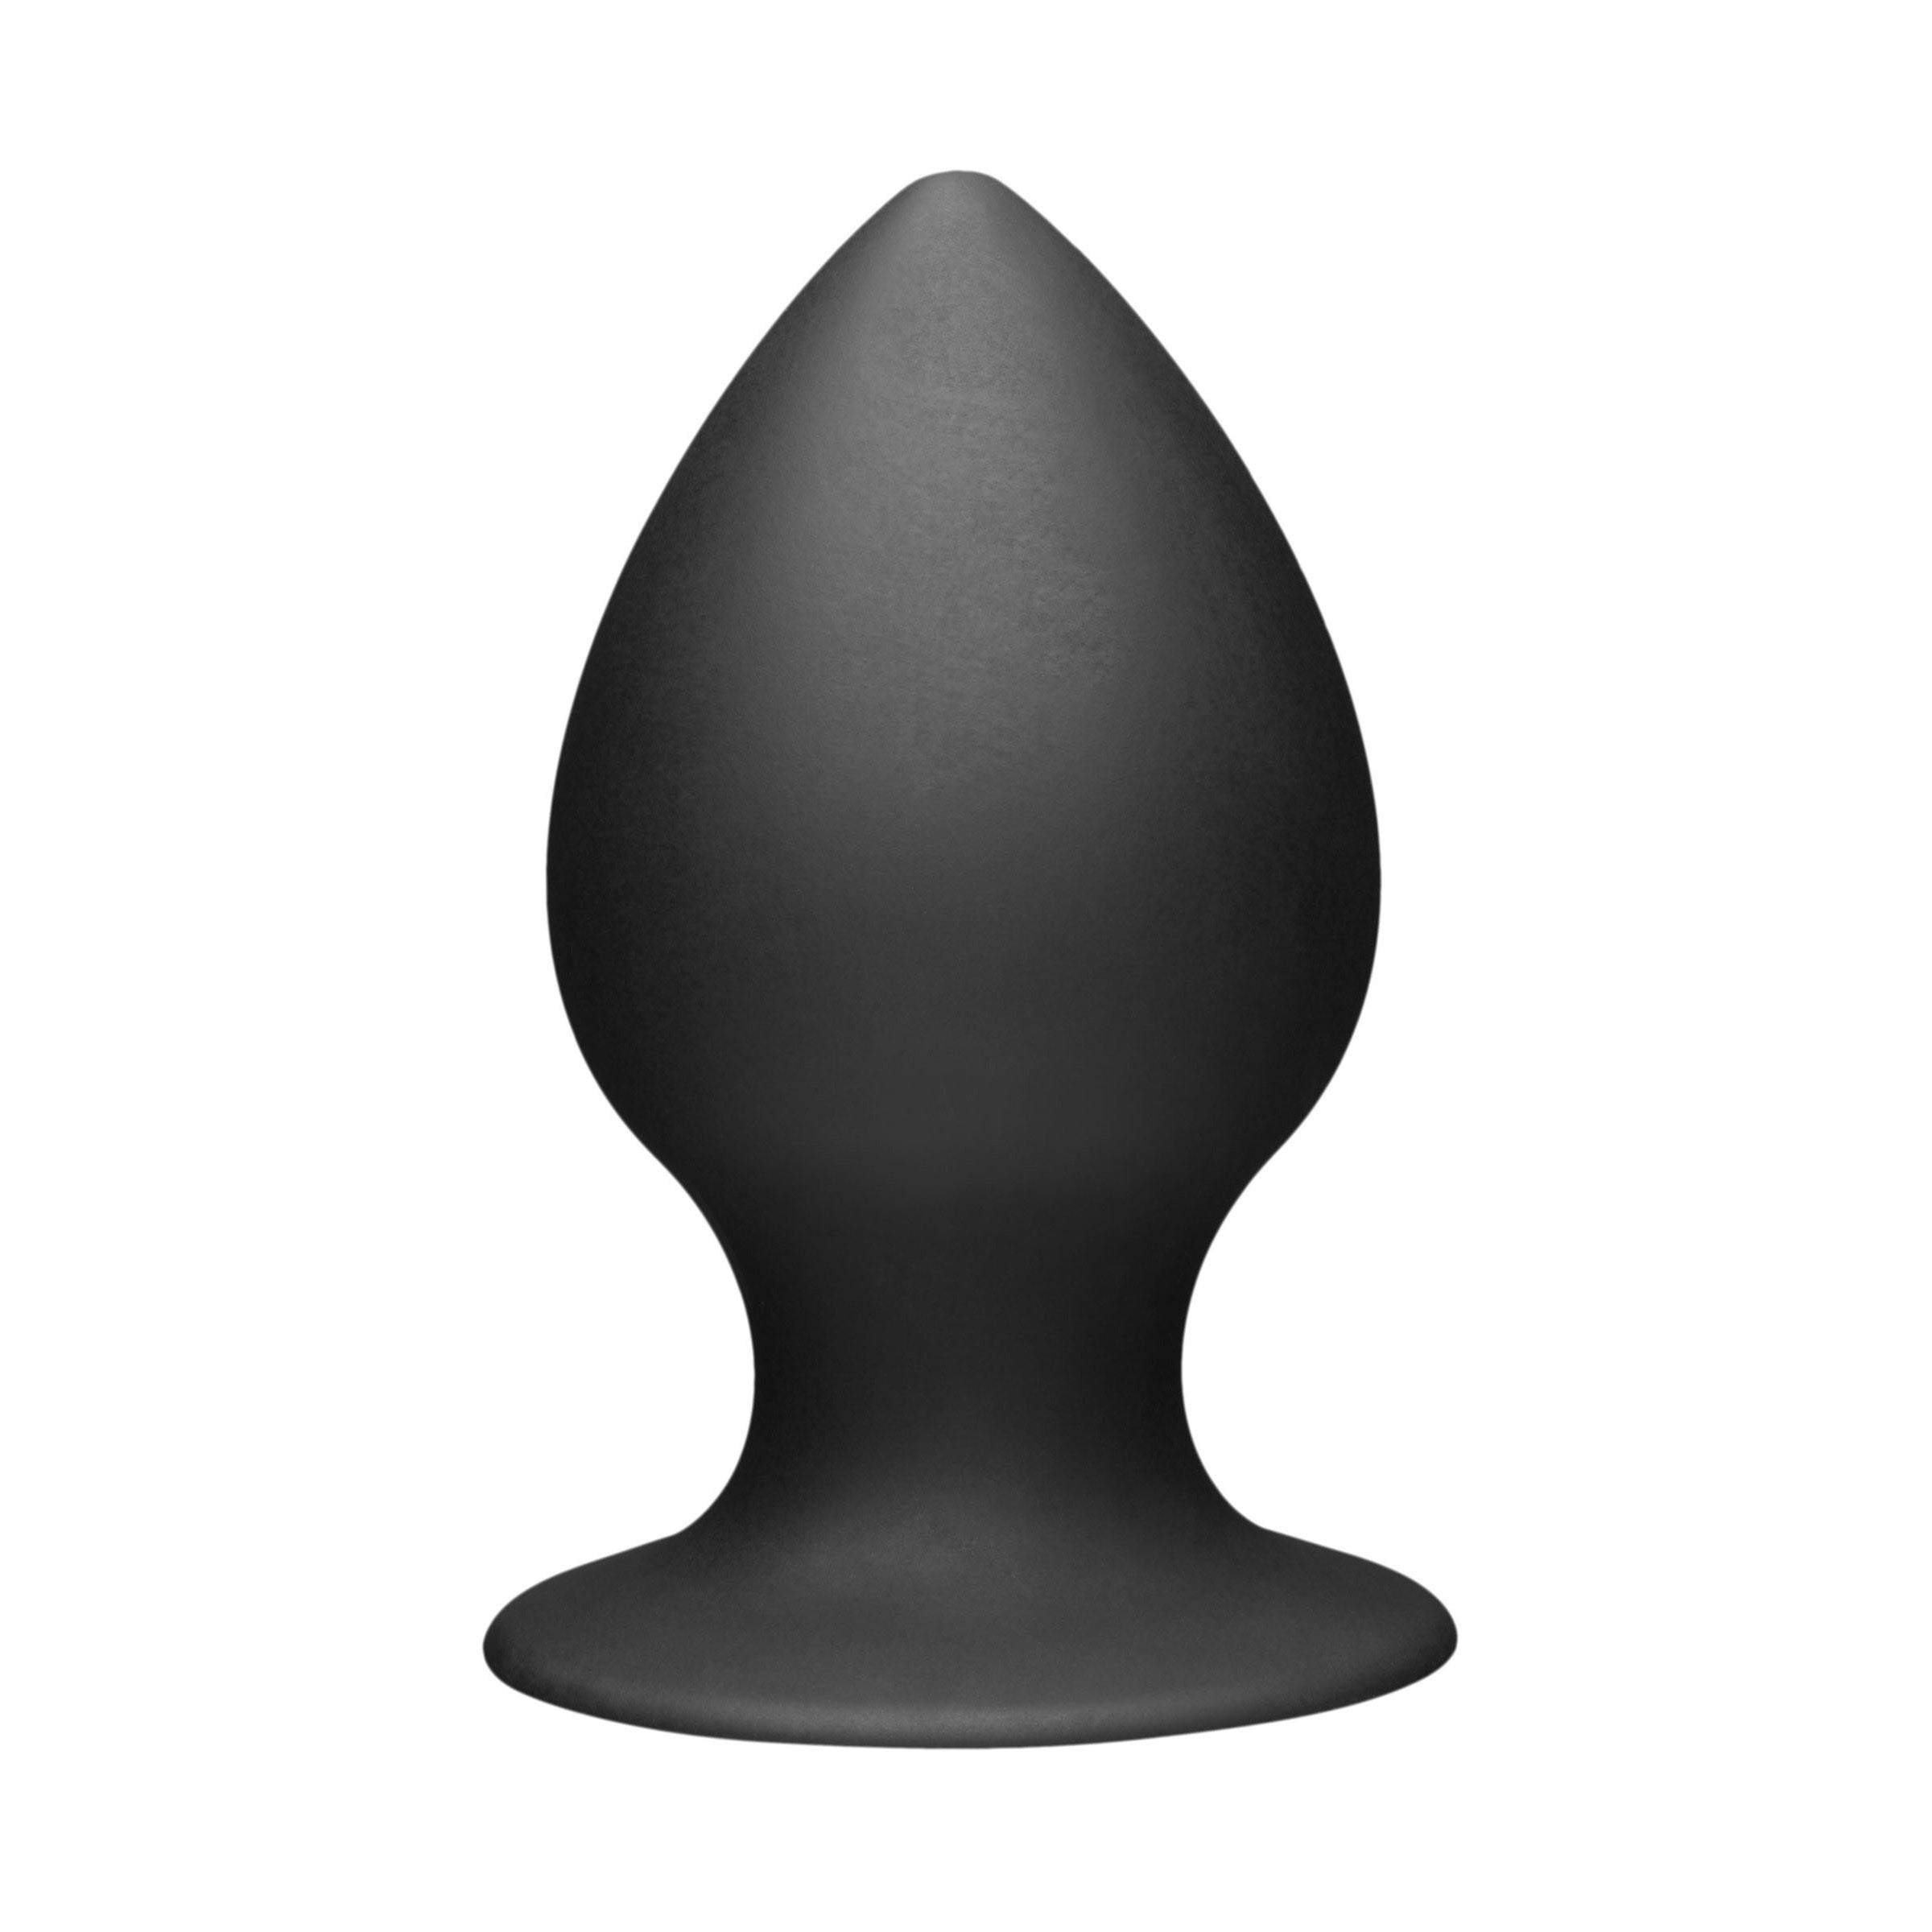 Tom of Finland XL Silicone Anal Plug – Adult Sex Toys, Intimate Supplies, Sexual Wellness, Online Sex Store picture